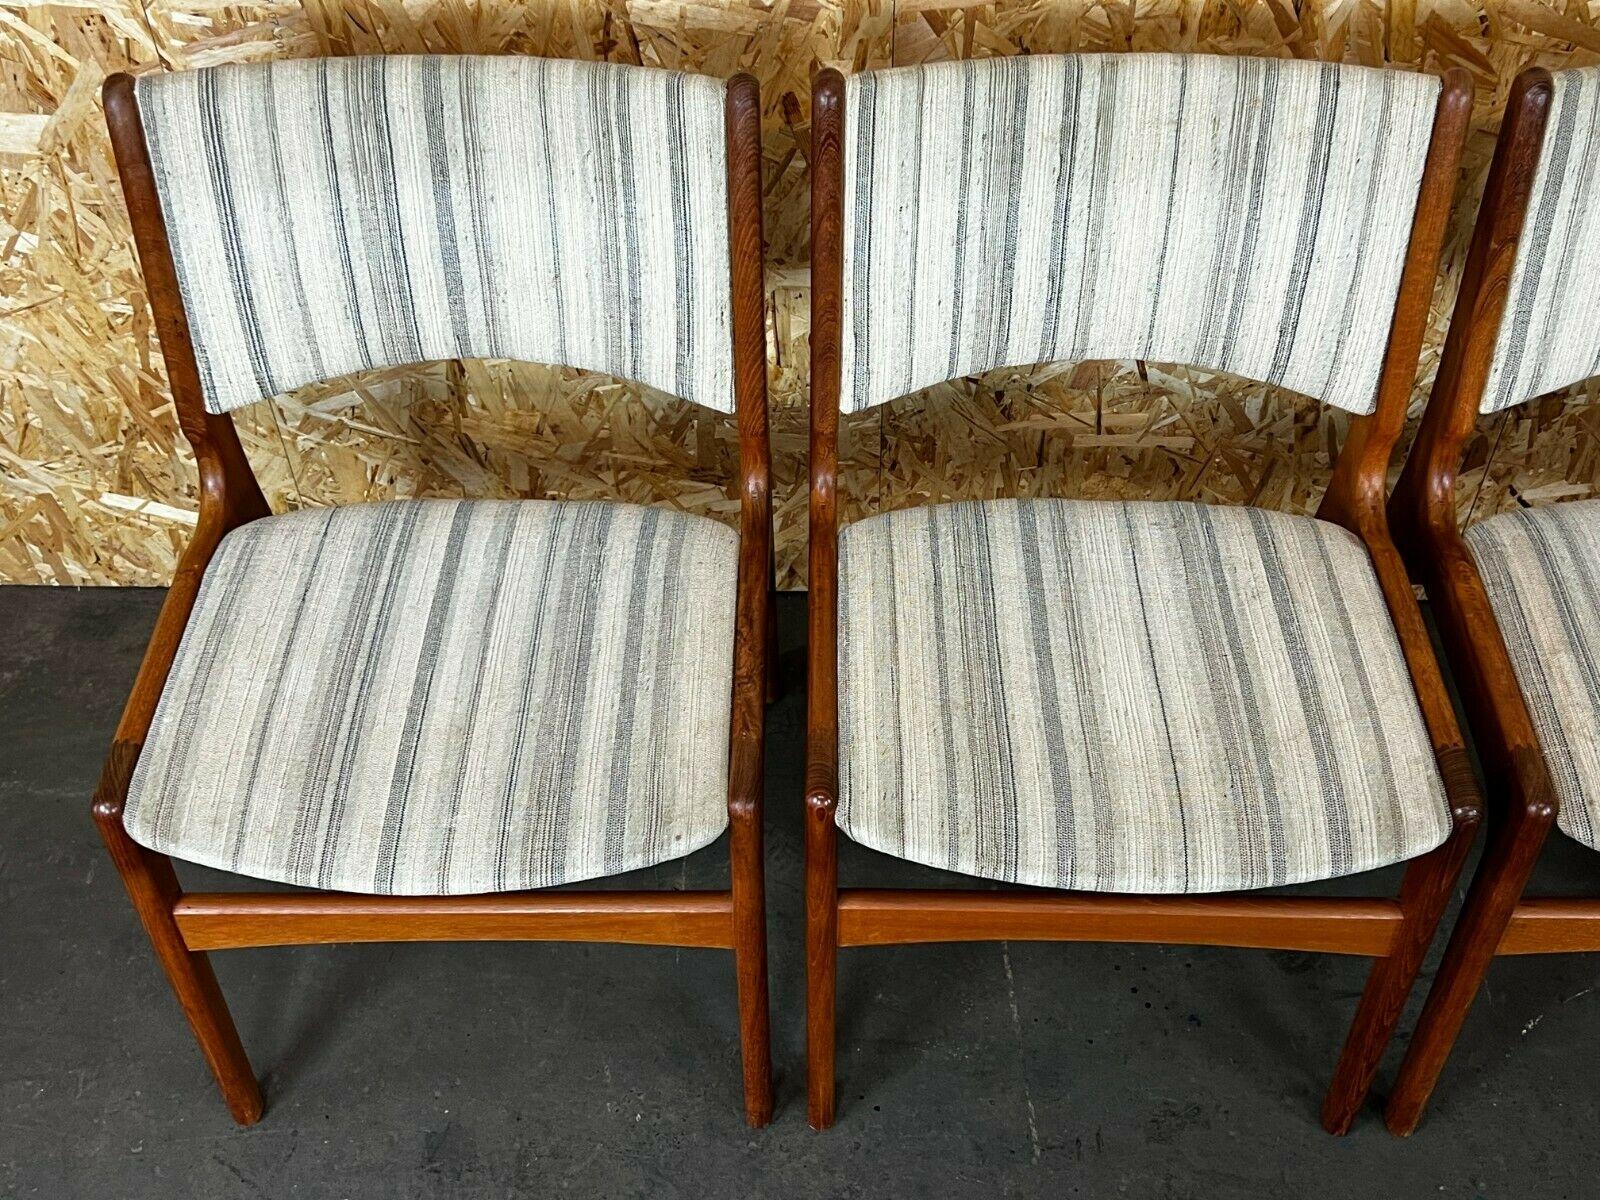 70s style dining chairs